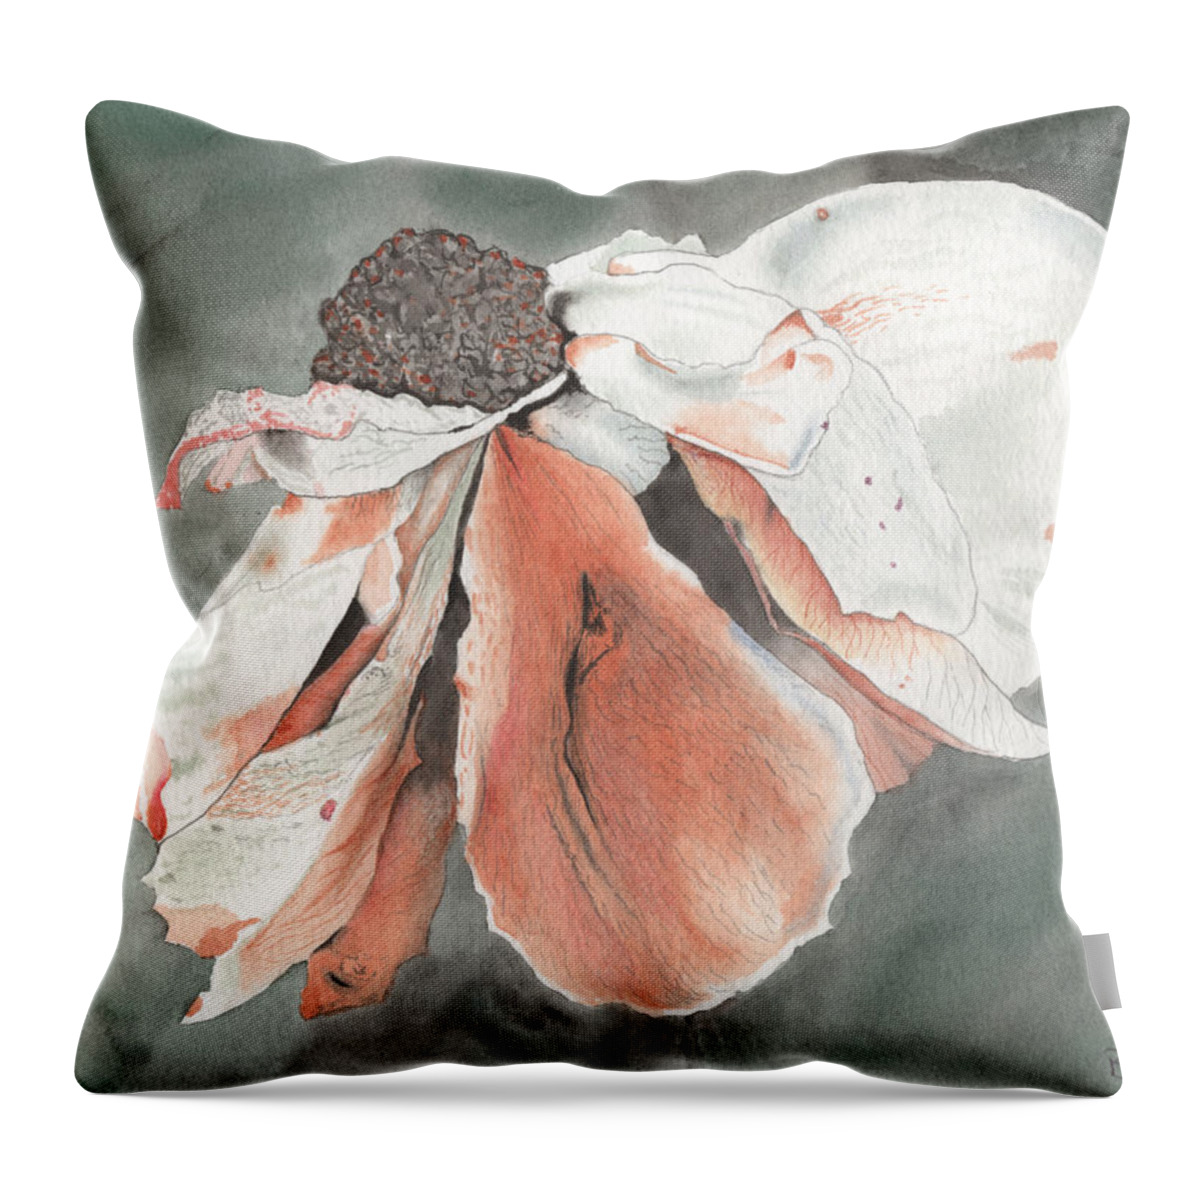 Faded Glory Throw Pillow featuring the painting Faded Glory by Bob Labno